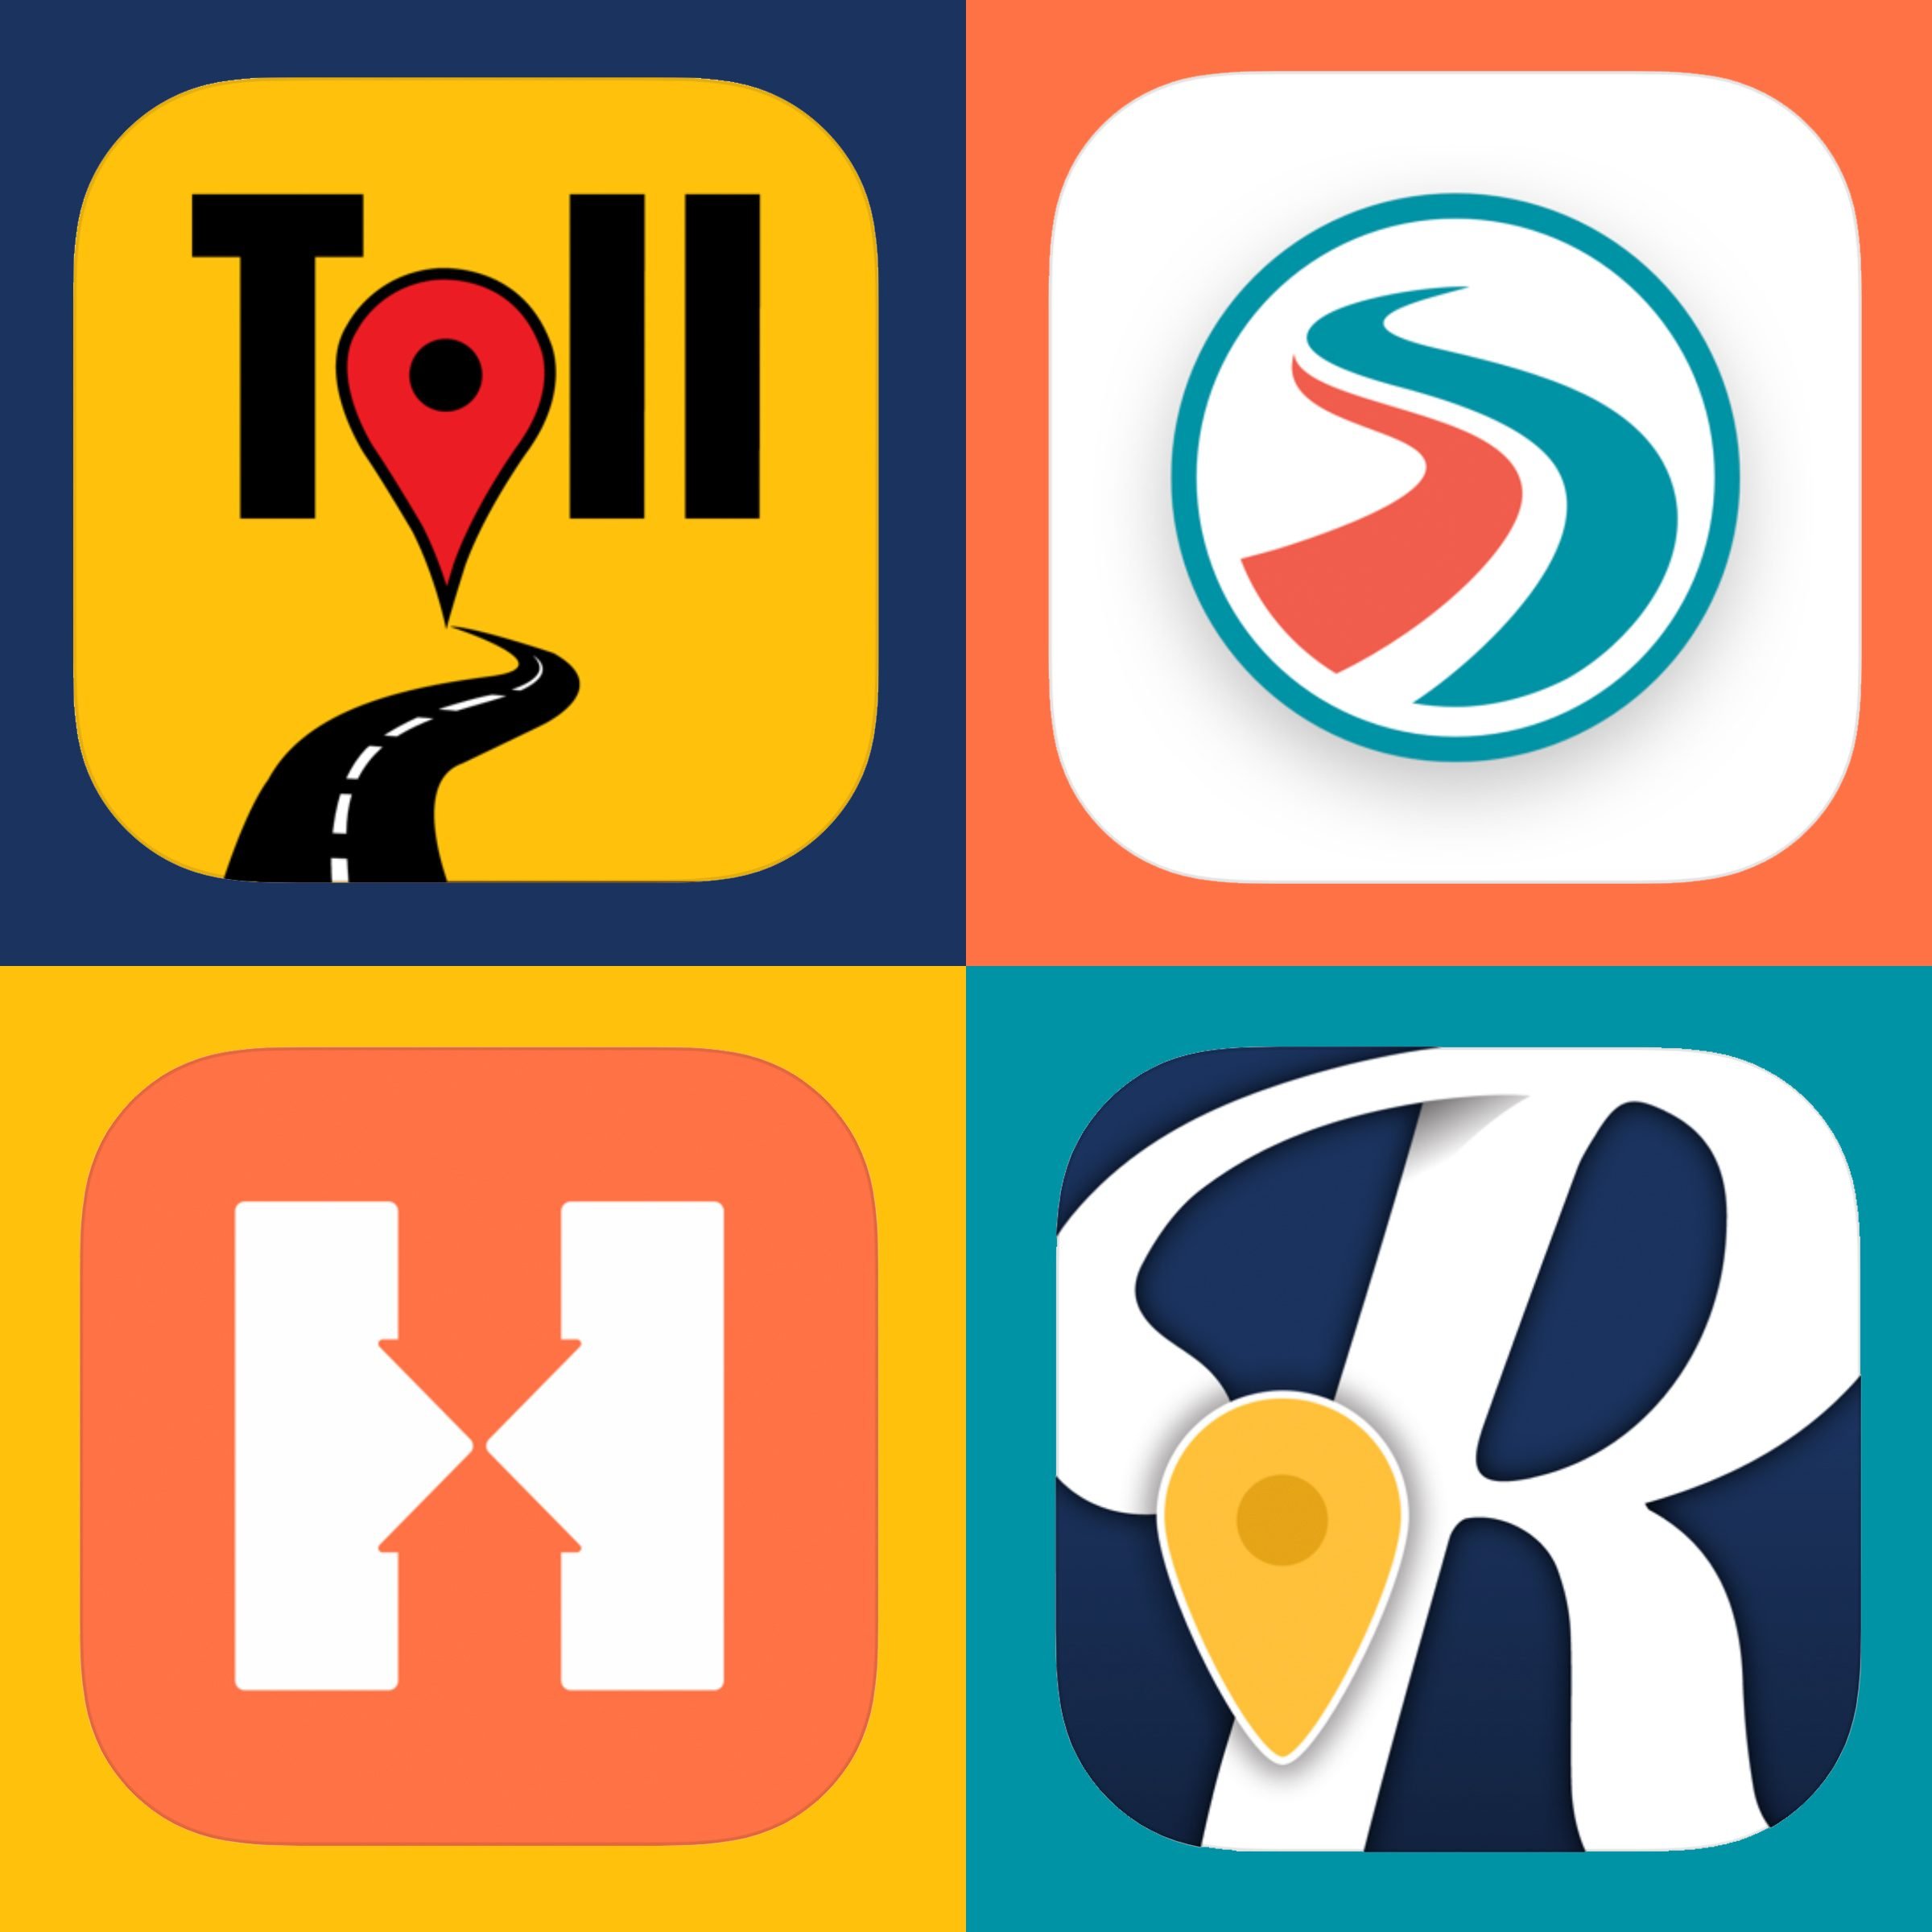 travel road trips apps